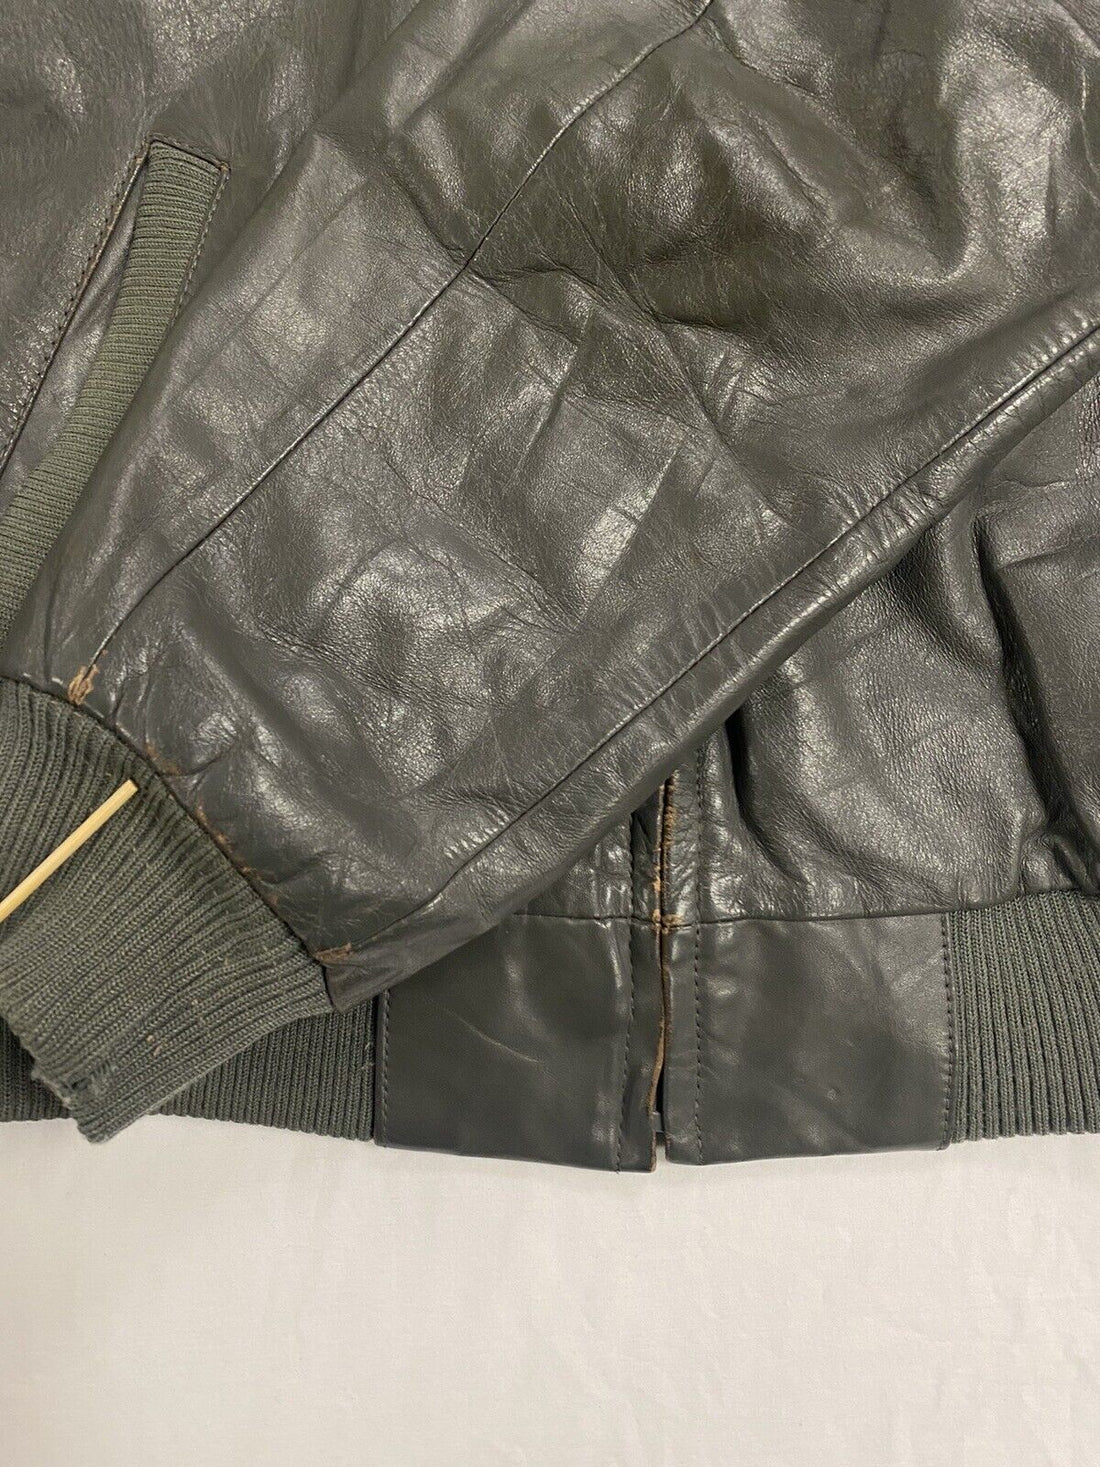 VINTAGE LEATHER JACKET MEMBERS ONLY by EUROPE CRAFT – mookeebyyuske